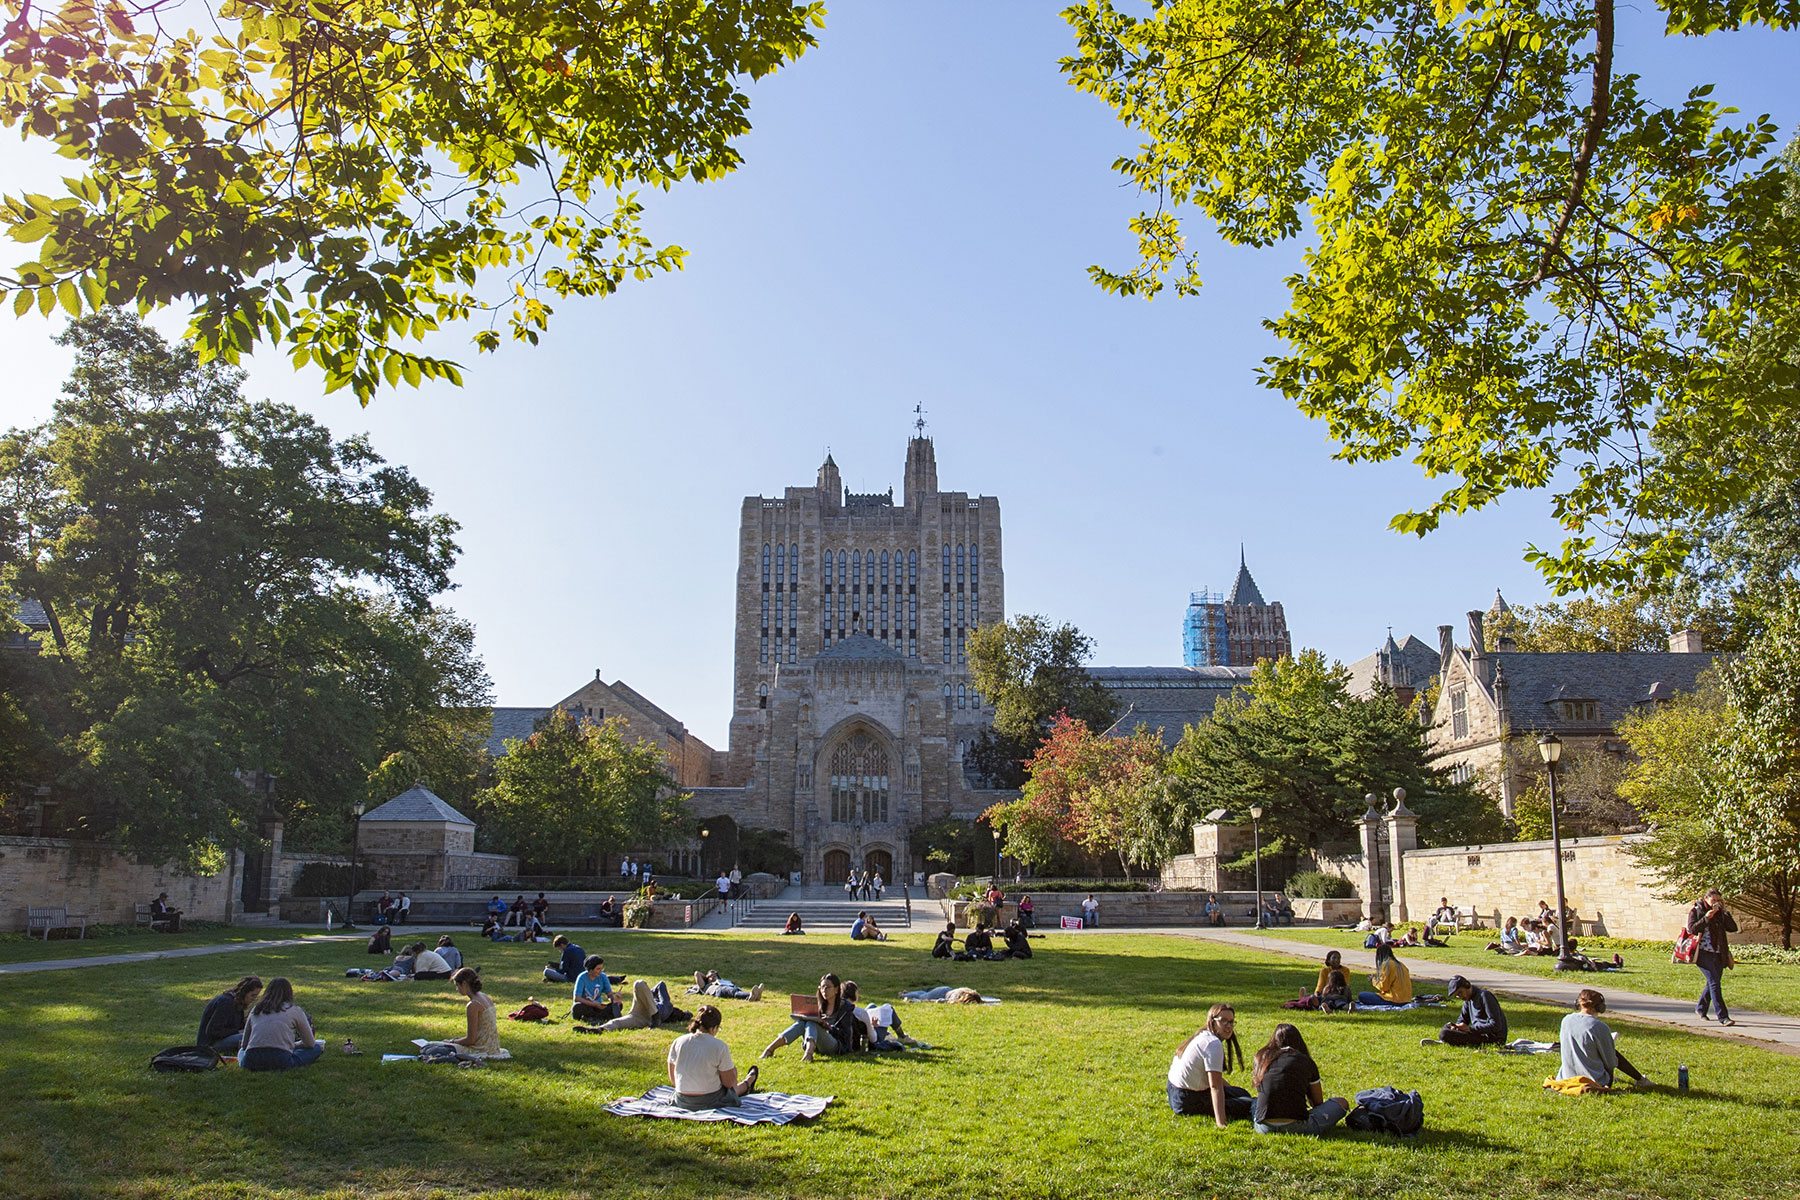 Exterior of Sterling Memorial Library with students sitting on the green grass and trees overhead